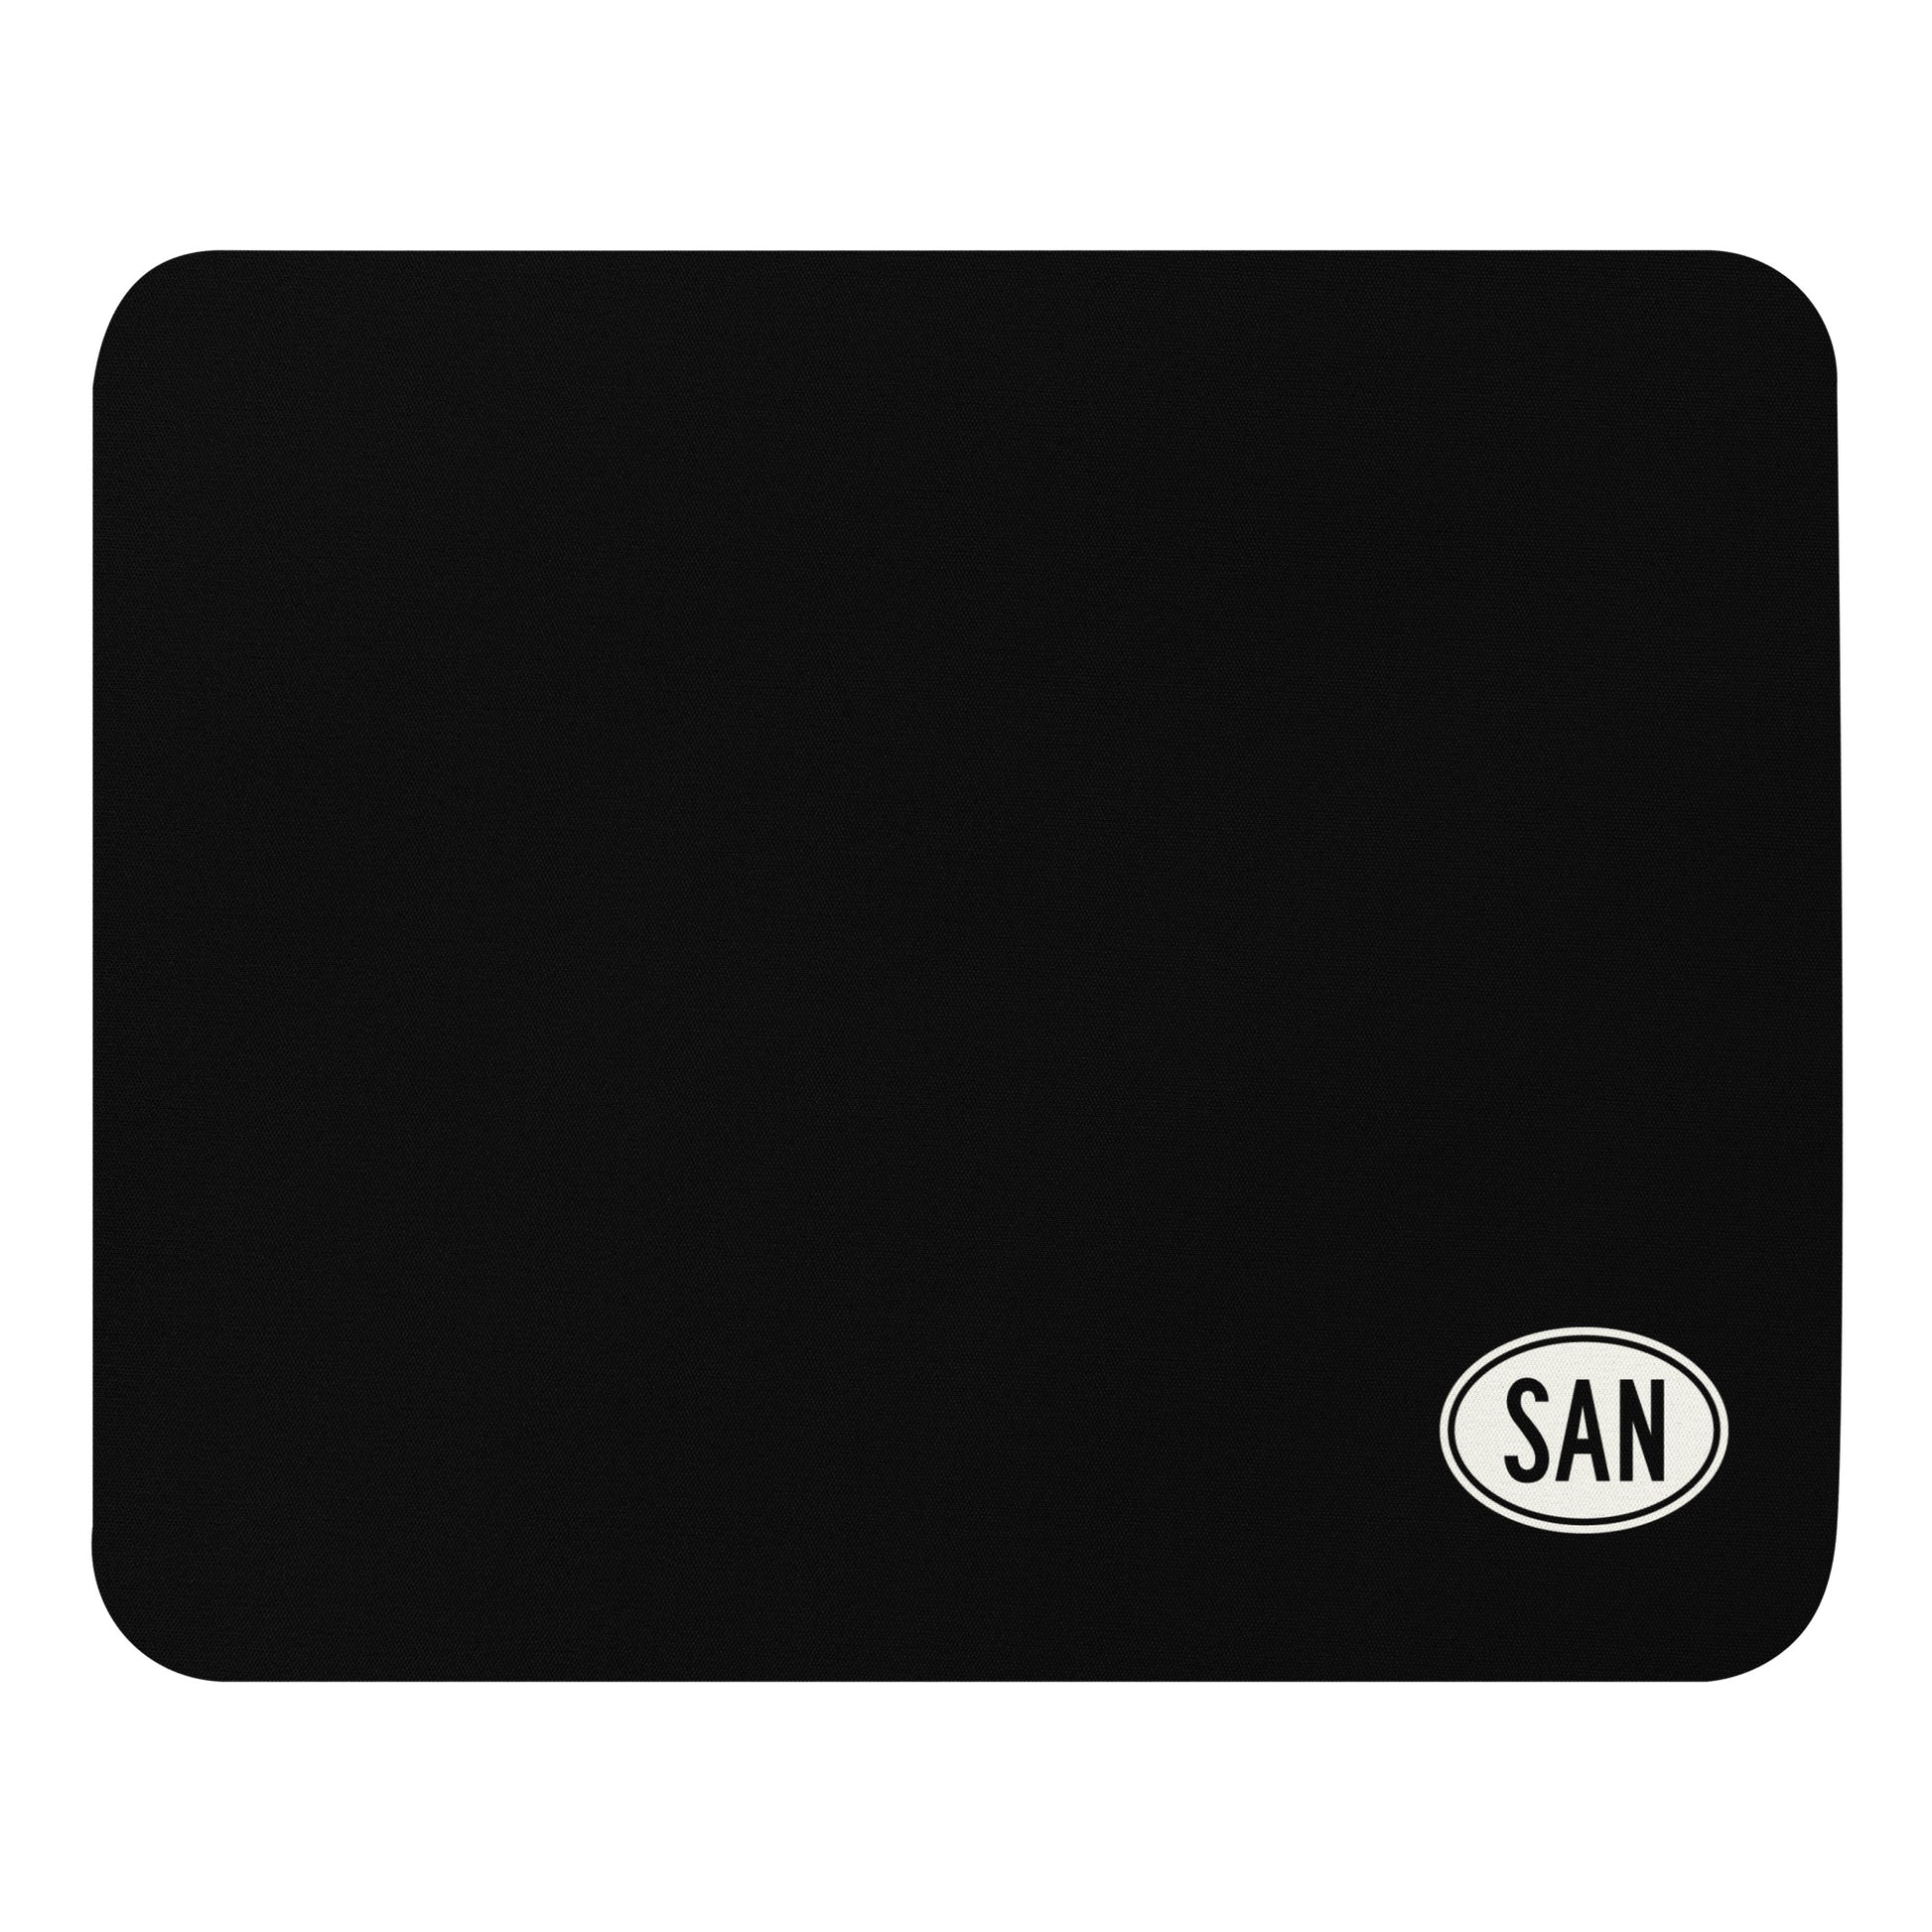 Unique Travel Gift Mouse Pad - White Oval • SAN San Diego • YHM Designs - Image 01